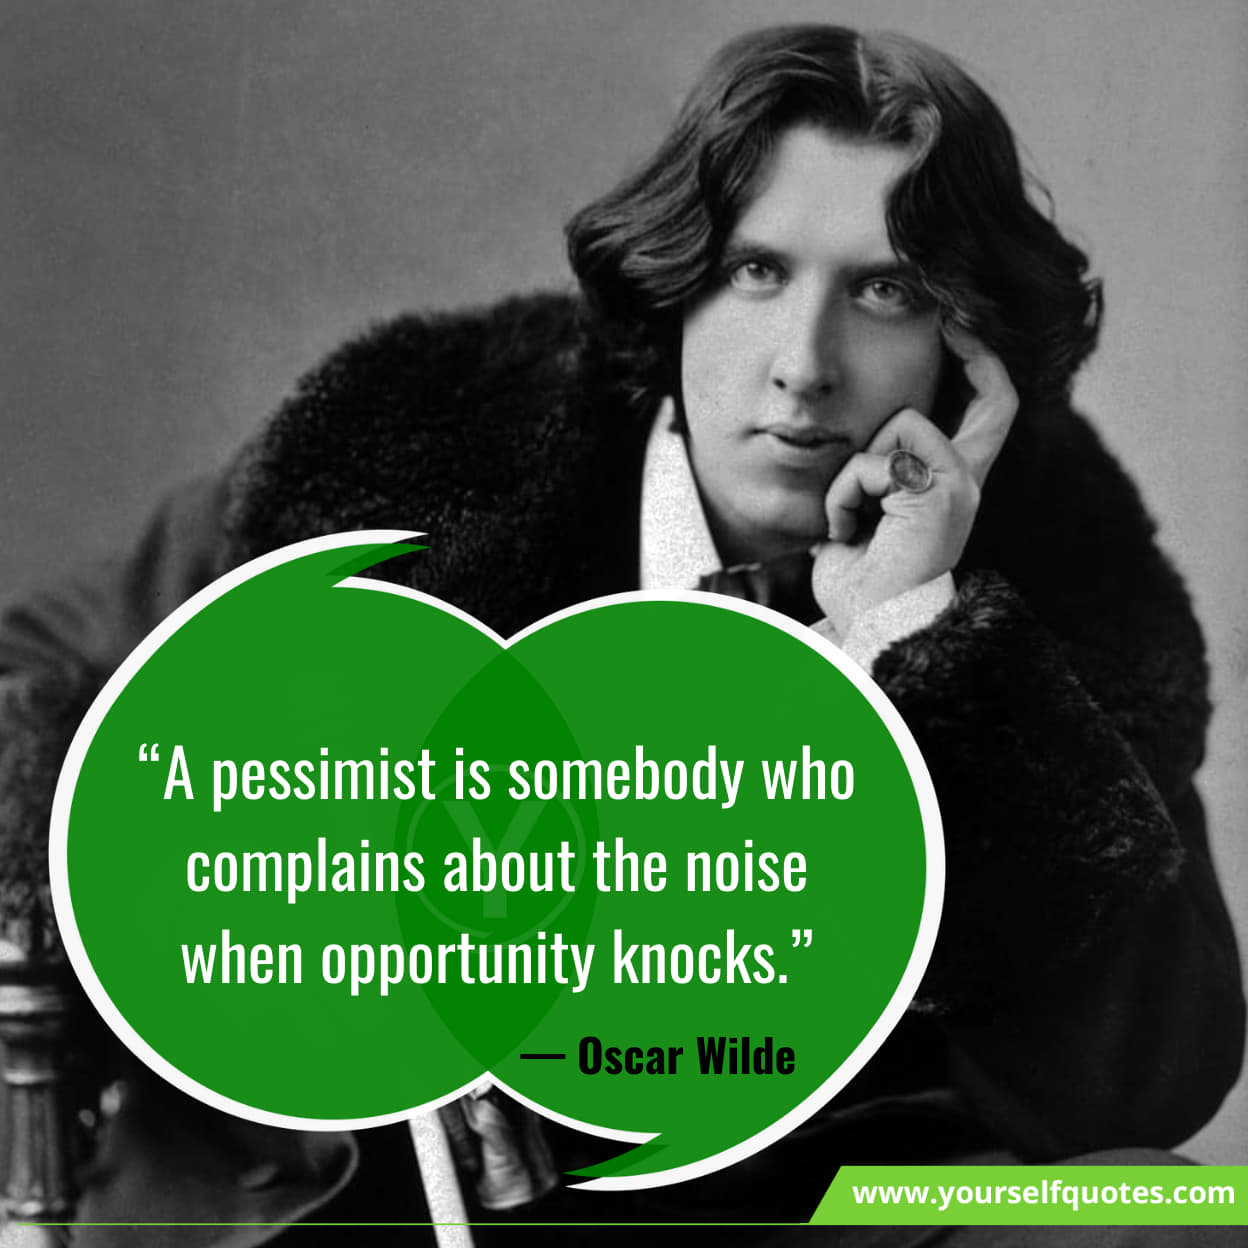 Oscar Wilde Quotes About Life